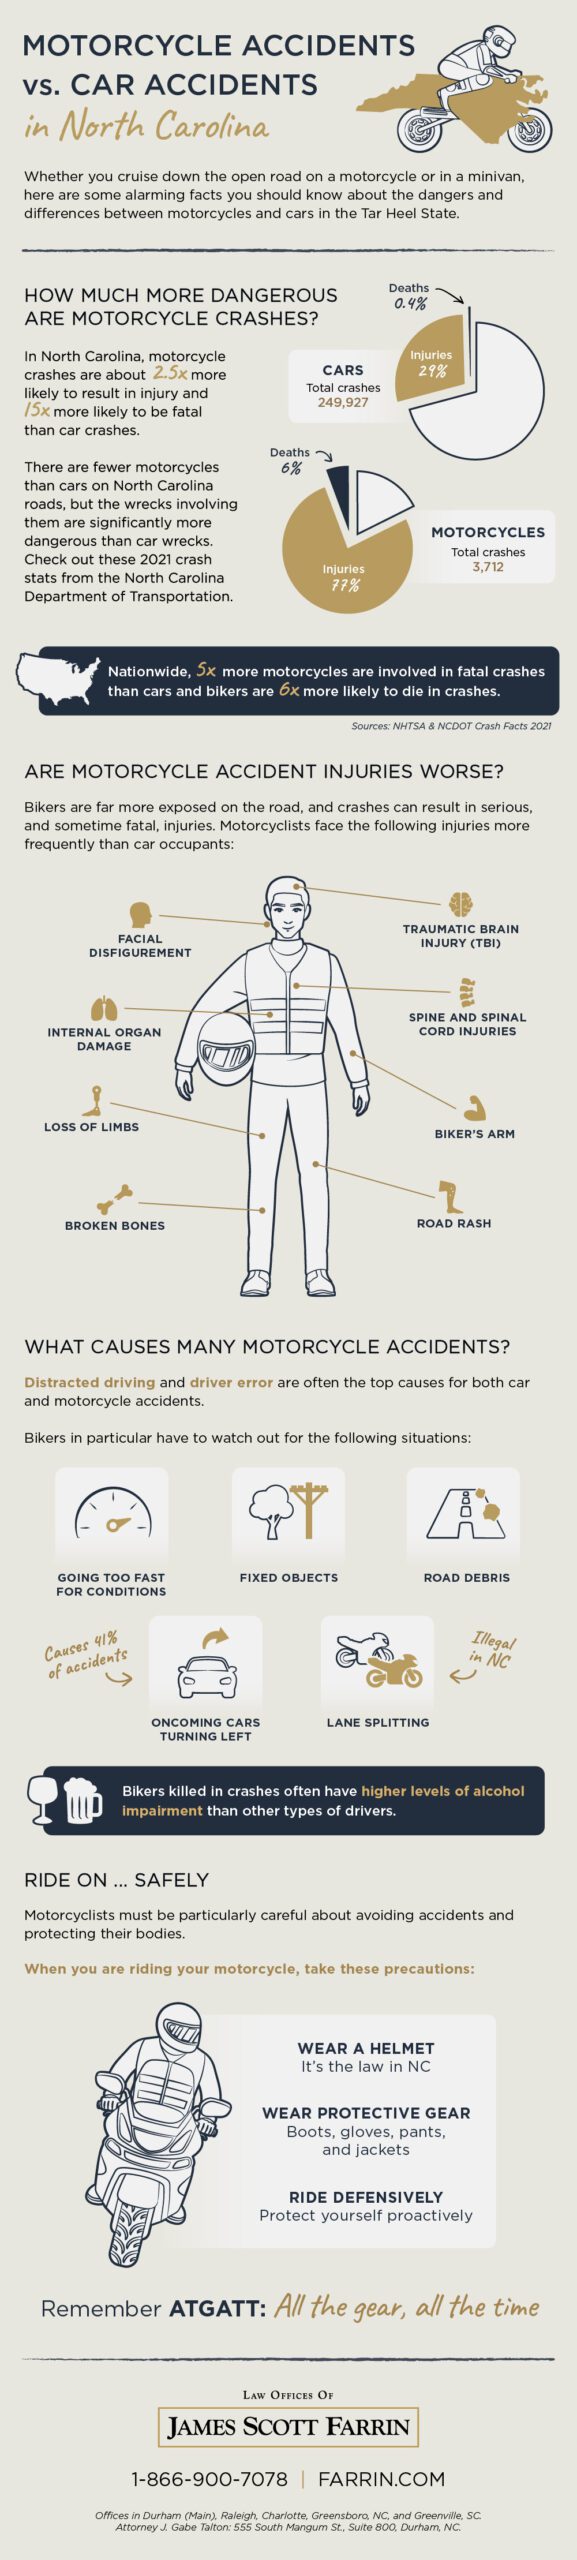 Infographic depicting the differences between motorcycle and car accidents. Motorcycle wrecks tend to be more dangerous.